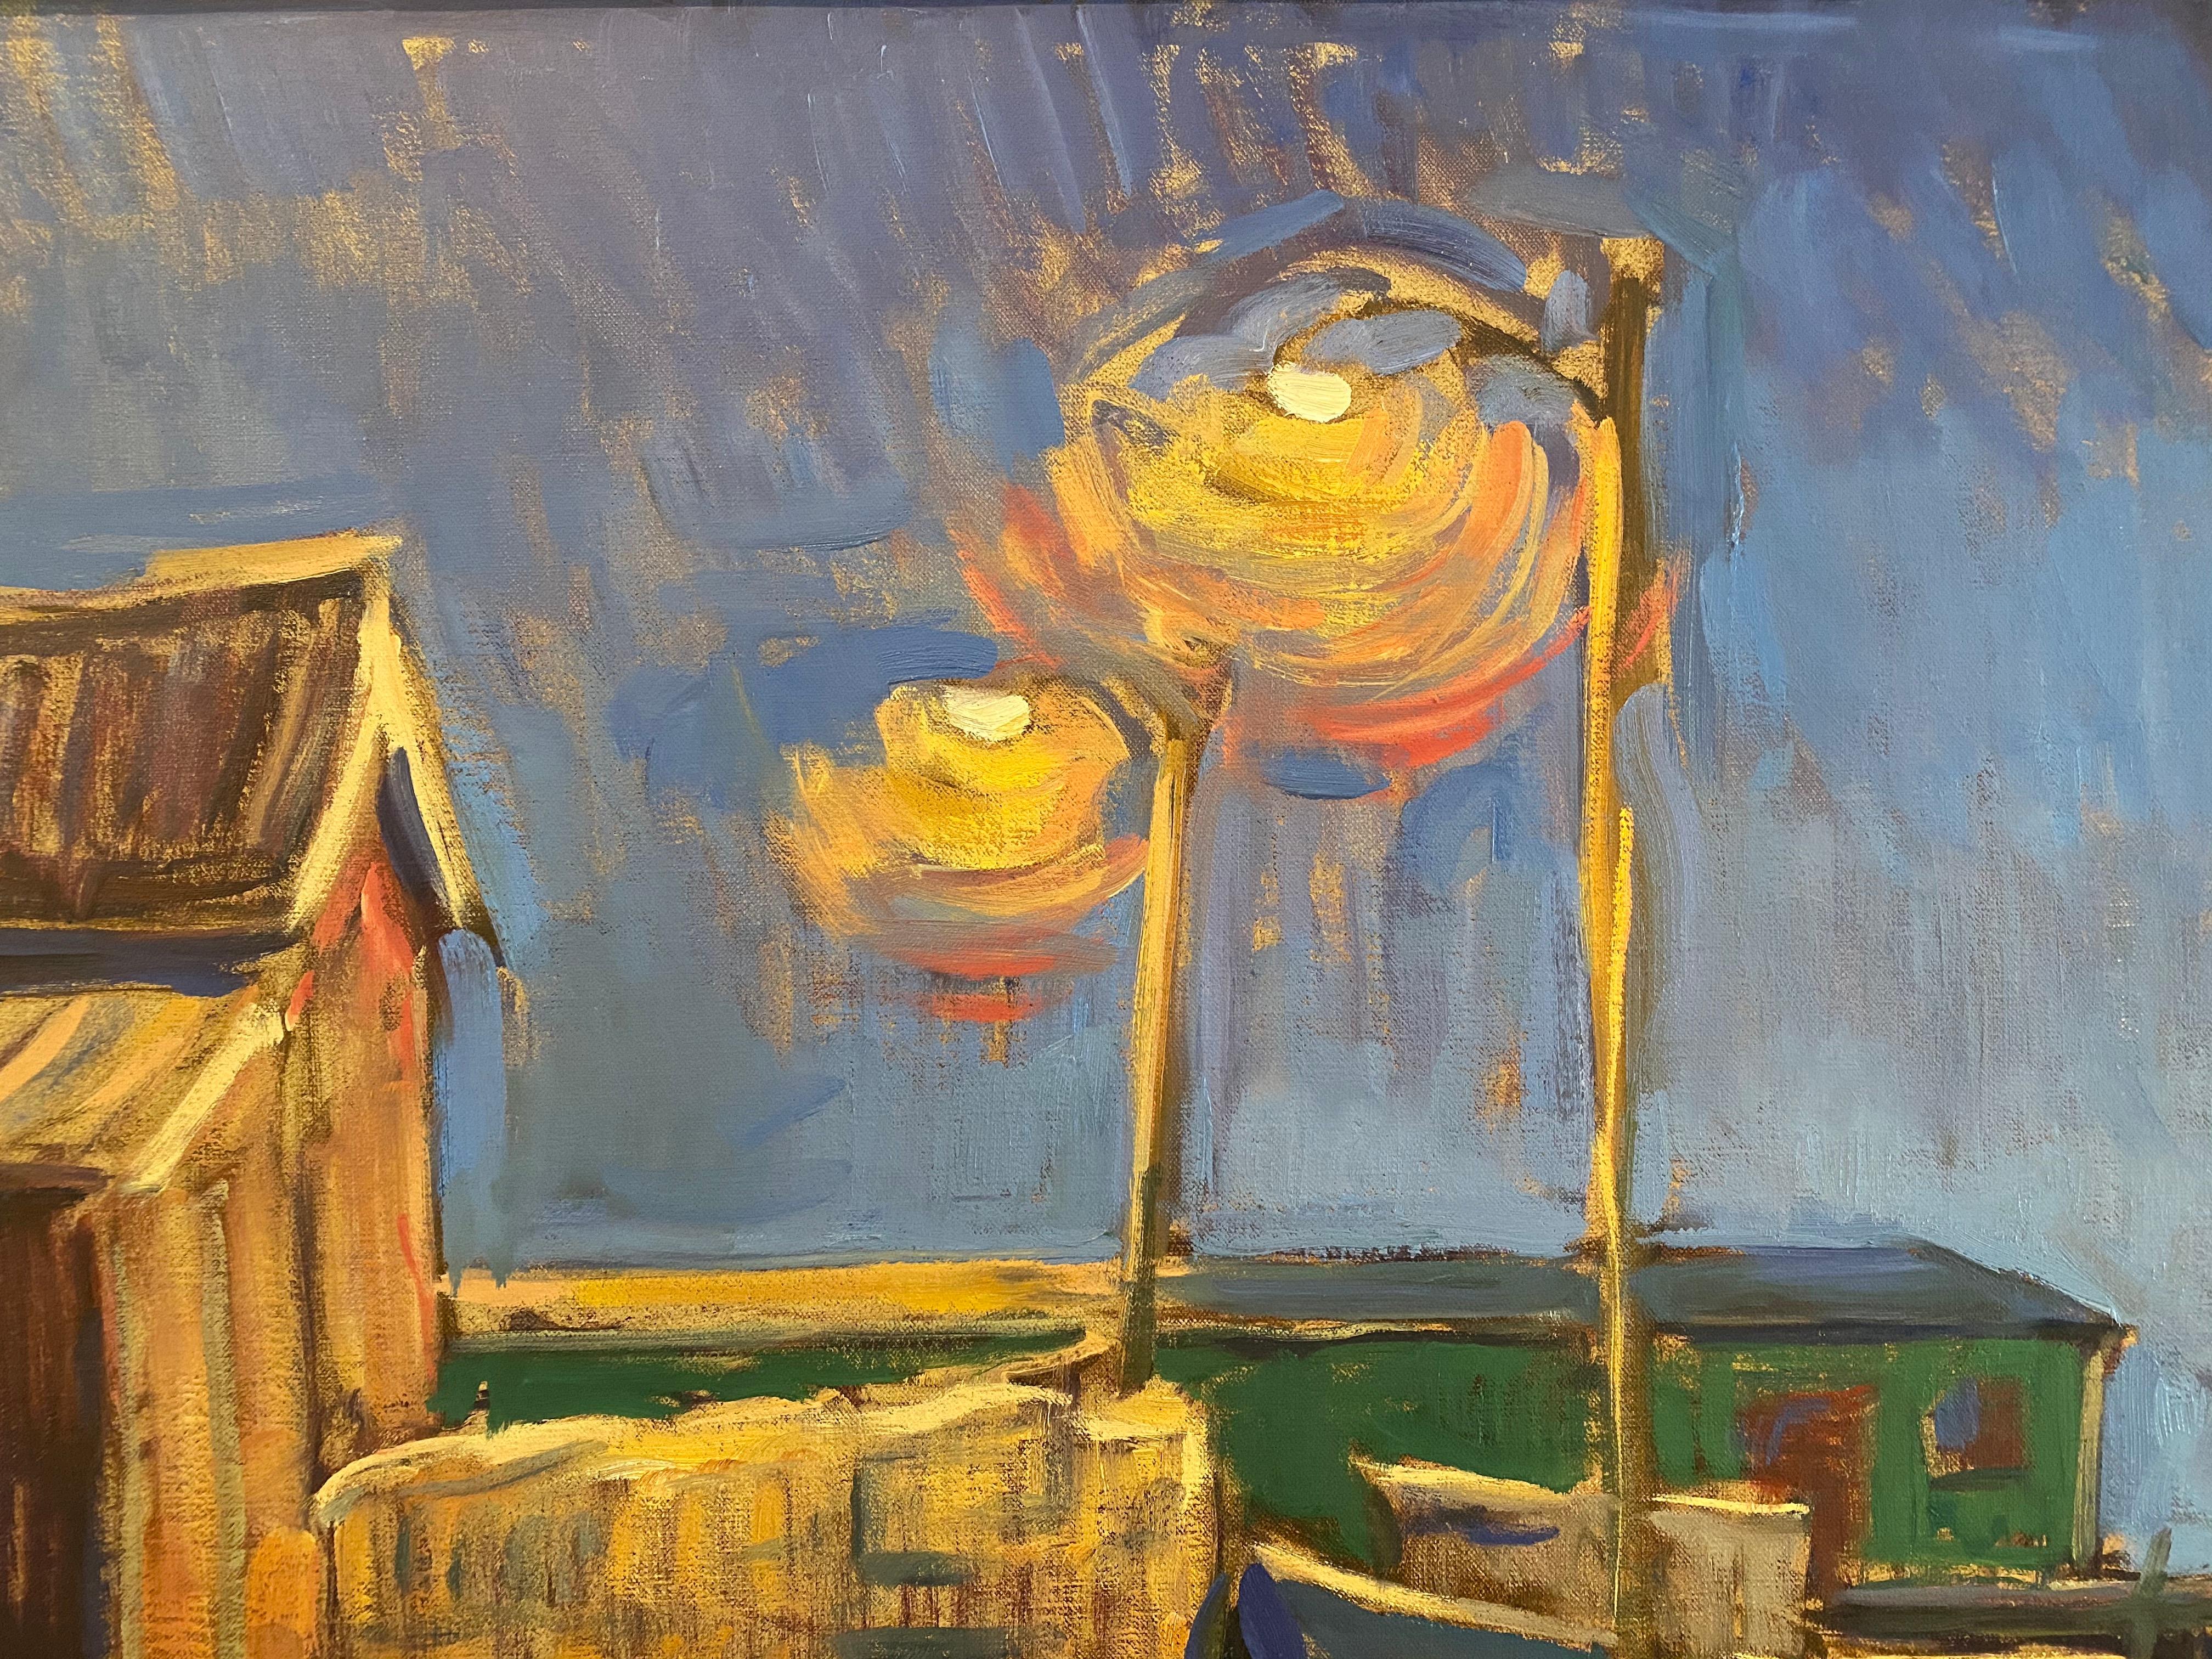 An oil painting of a marina at night. Lamp-posts glow with vibrating energy, creating luminous yellow auras rippling throughout. Tim McGuire is classically trained, yet paints loosely, creating an impressionist vision. 

Painting dimensions: 39.37 x